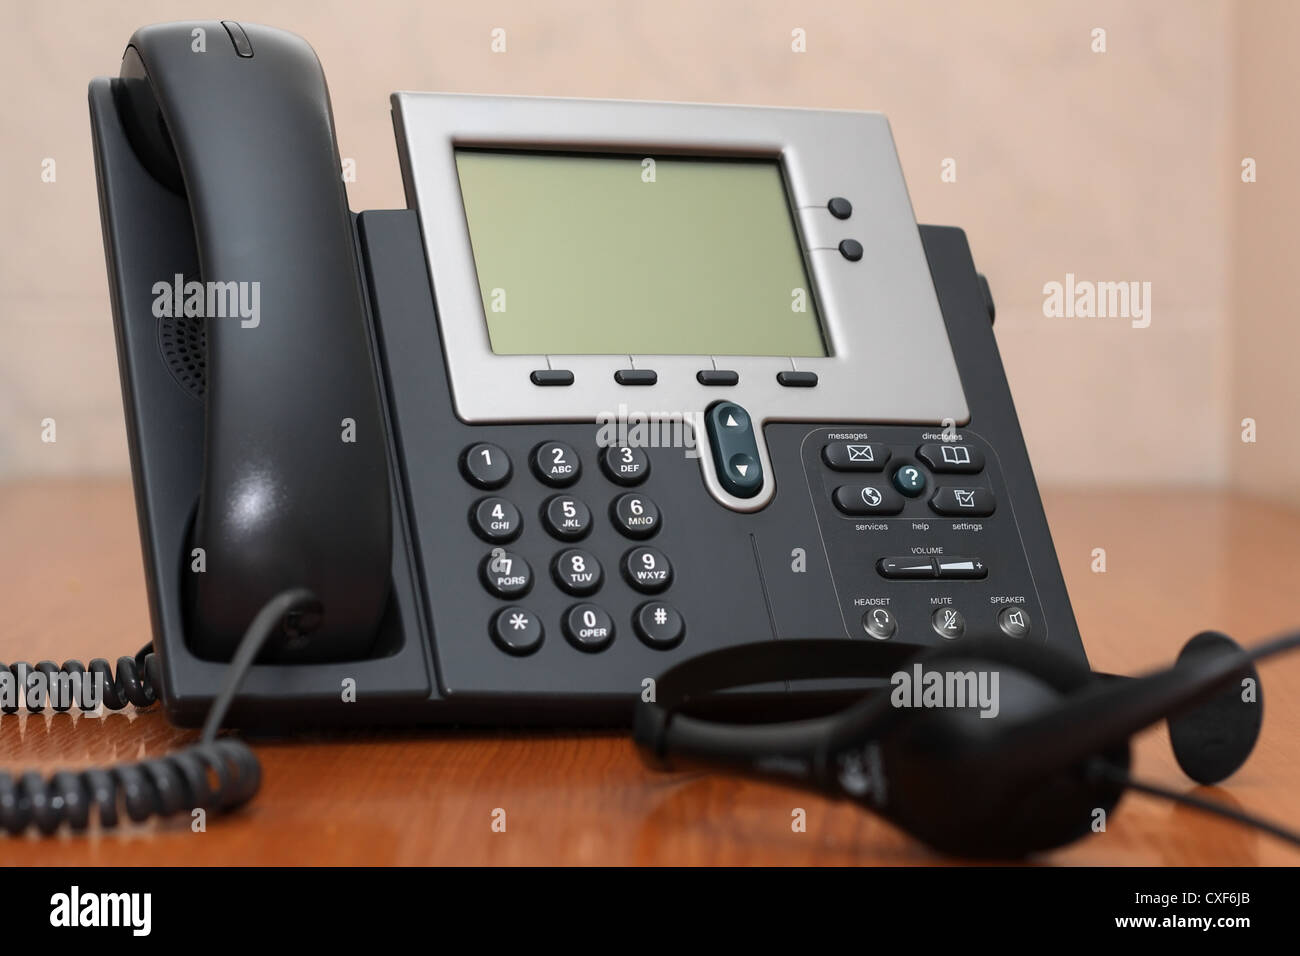 IP Phone close-up view with blurred headset on foreground Stock Photo